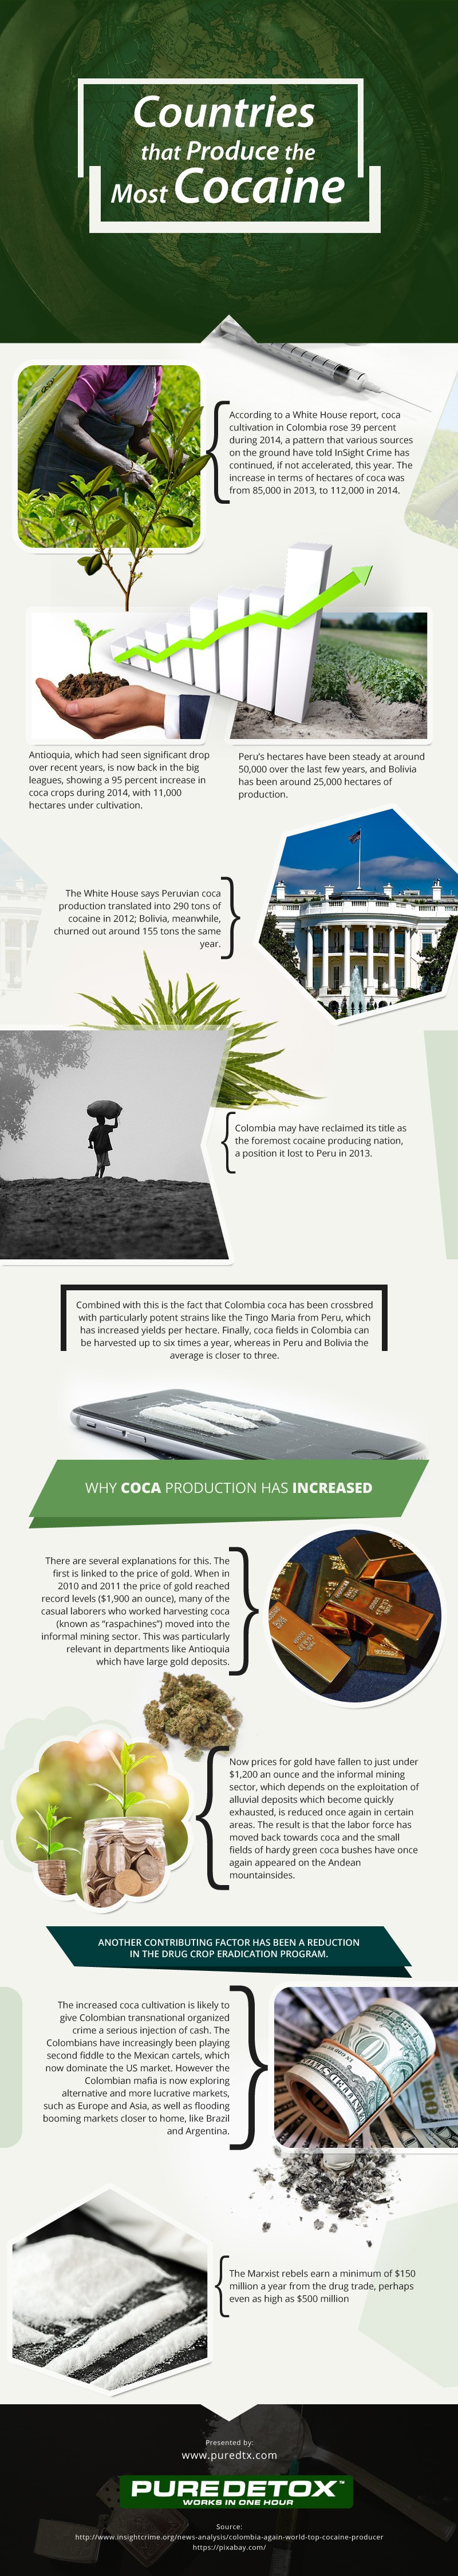 Countries-that-Produce-the-Most-Cocaine Infographic